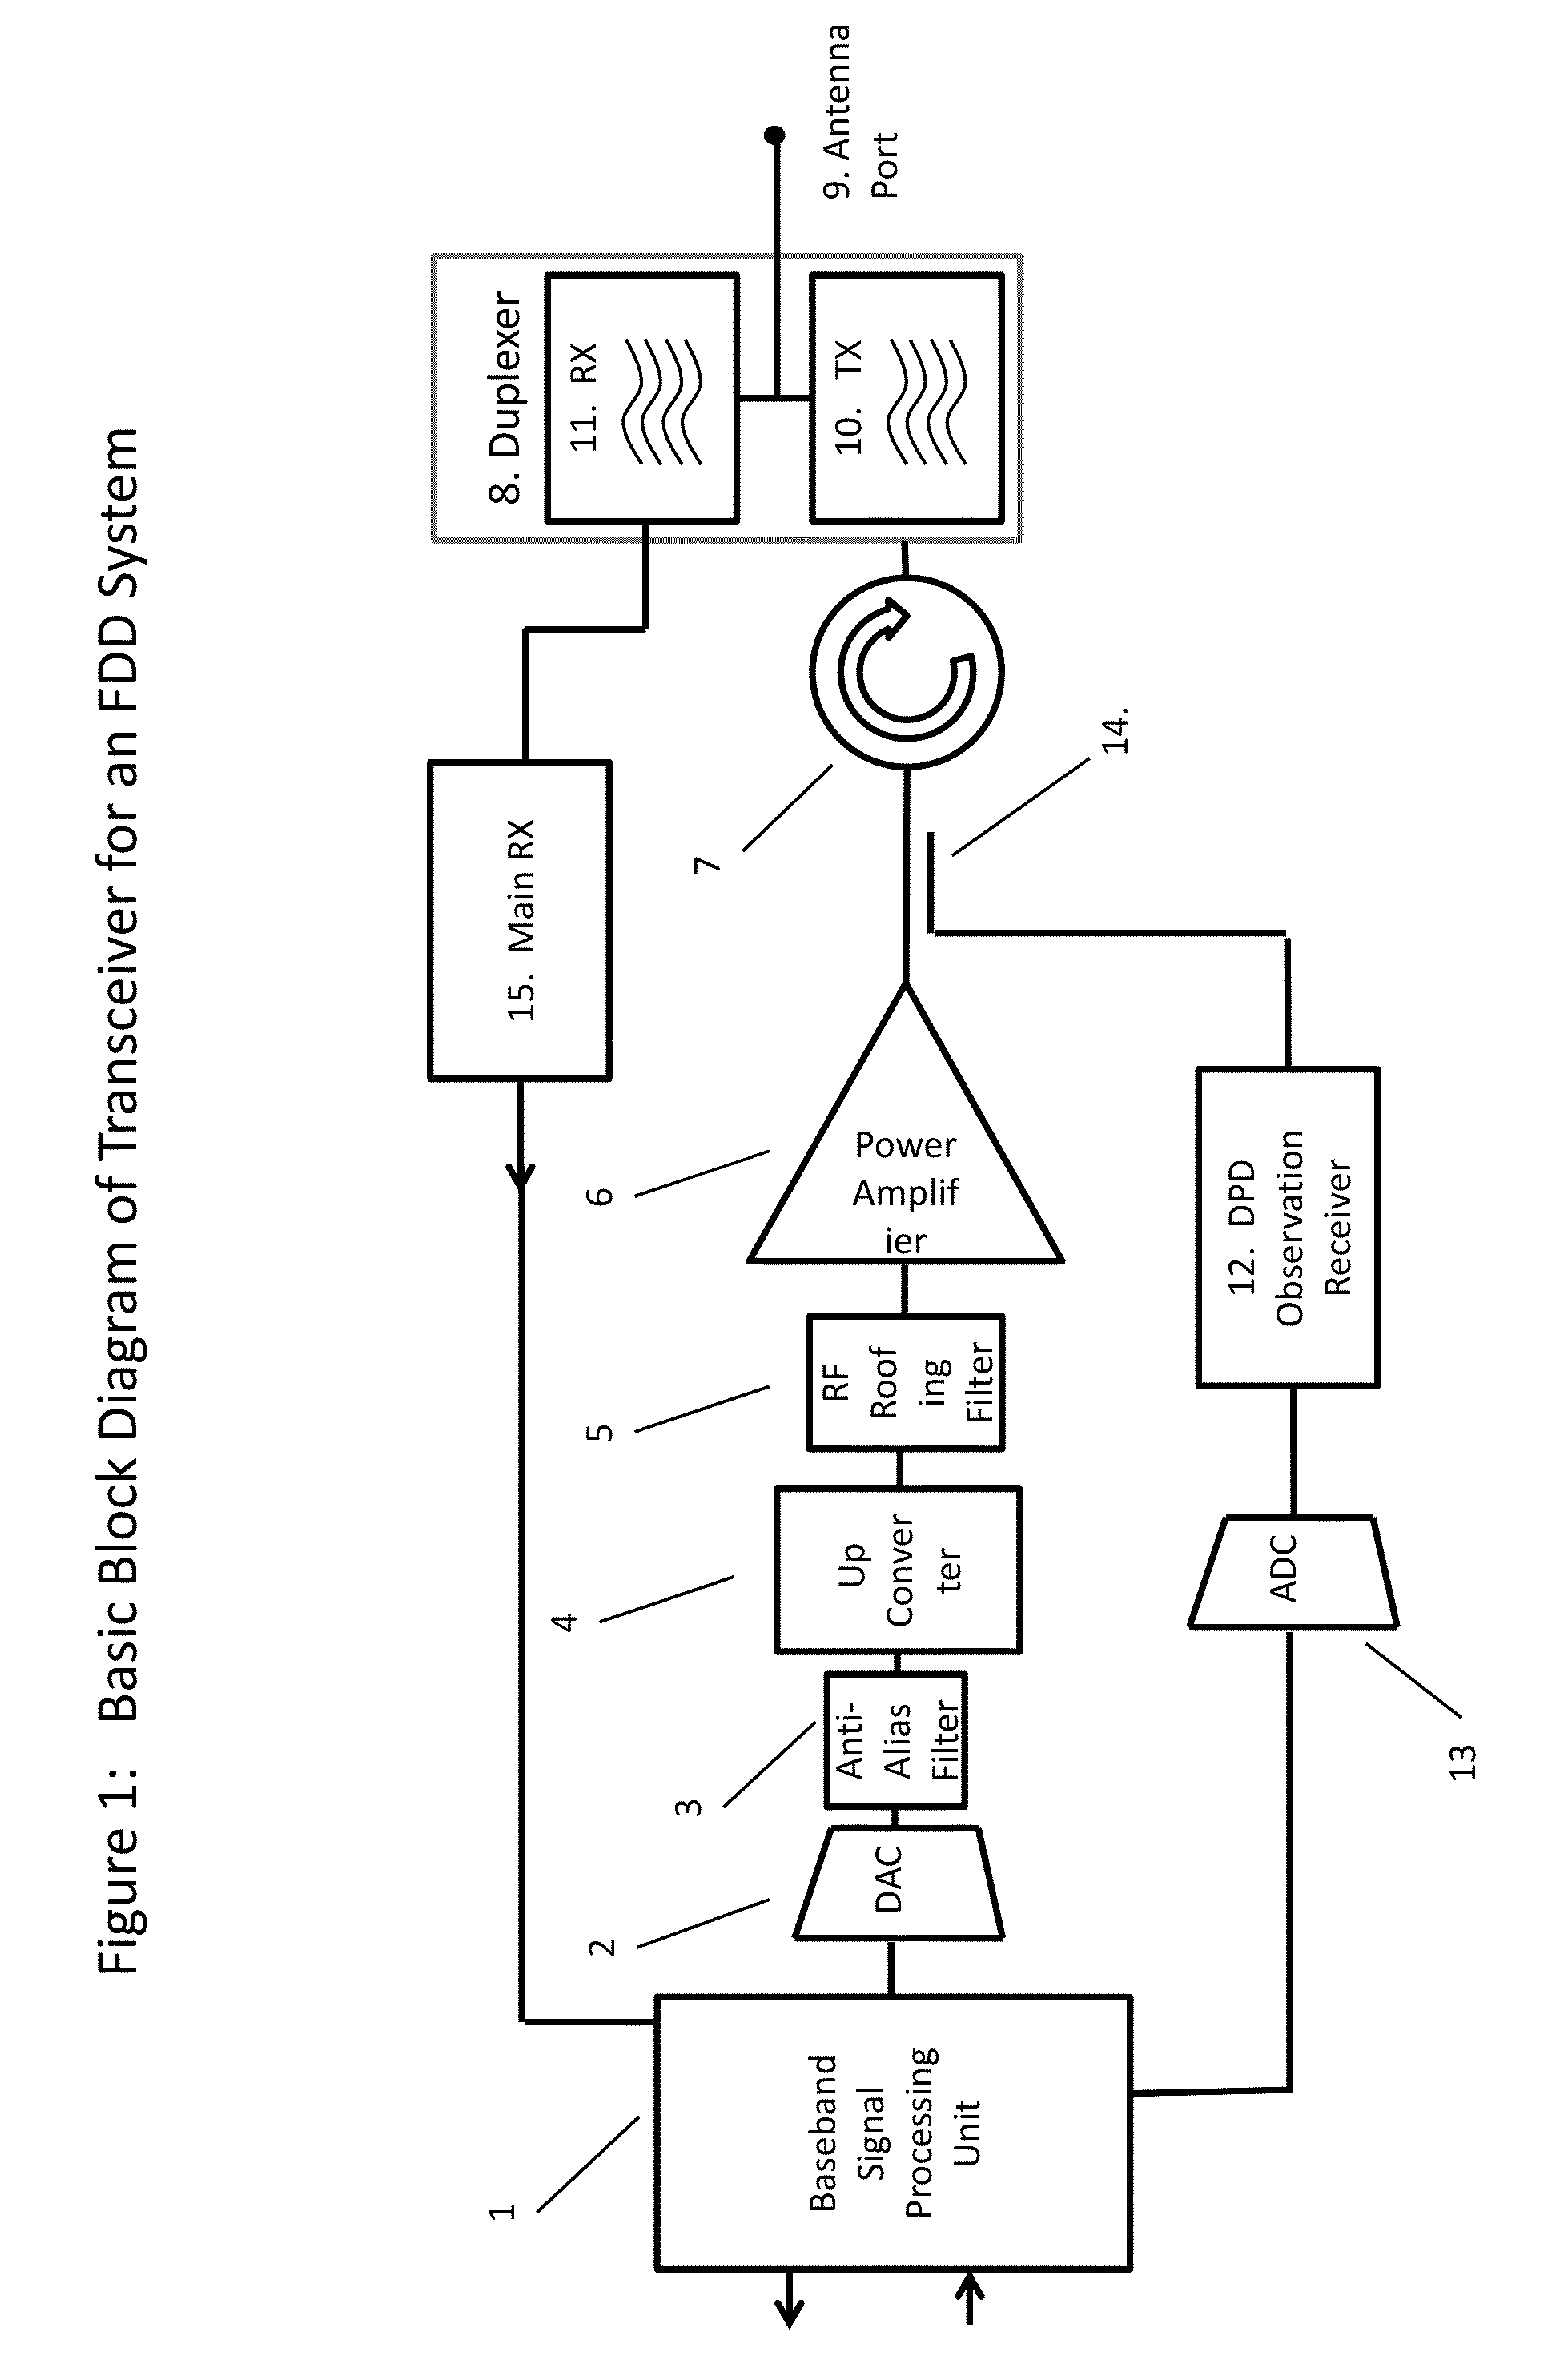 Apparatus, system and method for performing peak power reduction of a communication signal